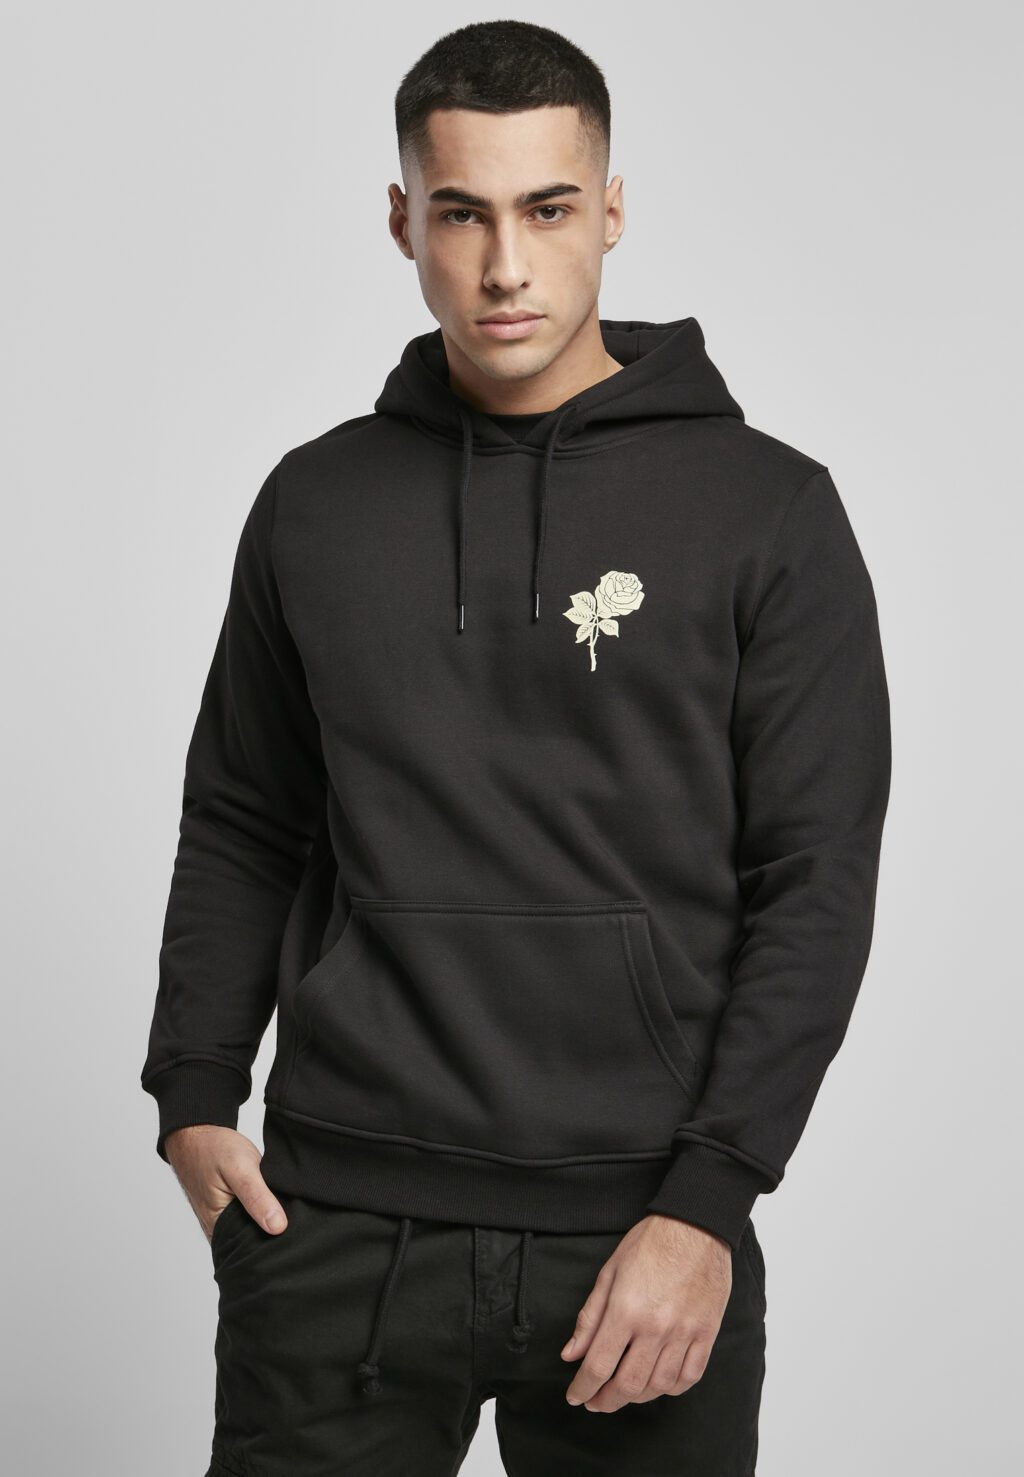 Wasted Youth Hoody black MT1537